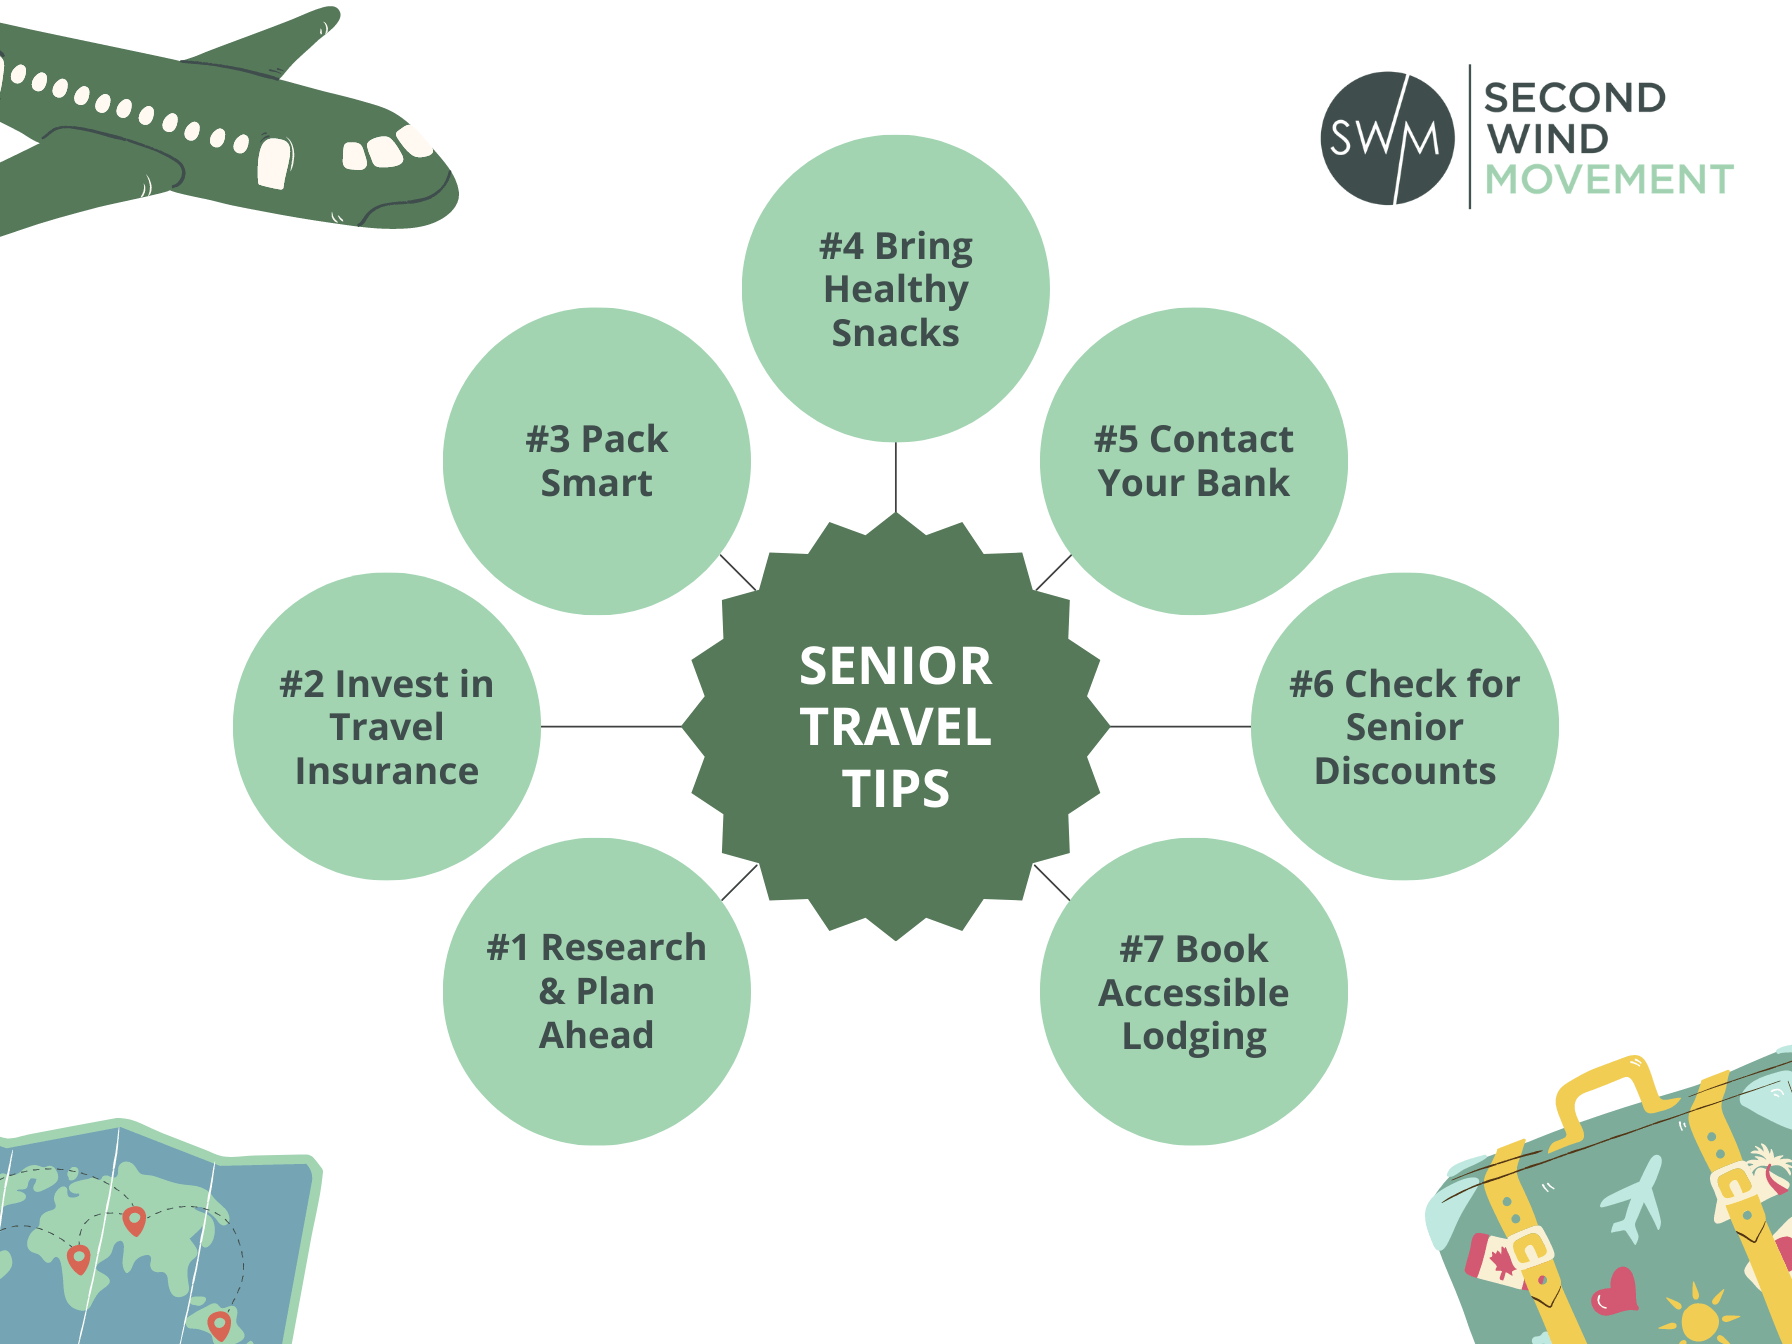 senior travel tips: research and plan ahead, invest in travel insurance, pack smart, bring healthy snacks, contact your brank, check for senior discounts, and book accessible lodging